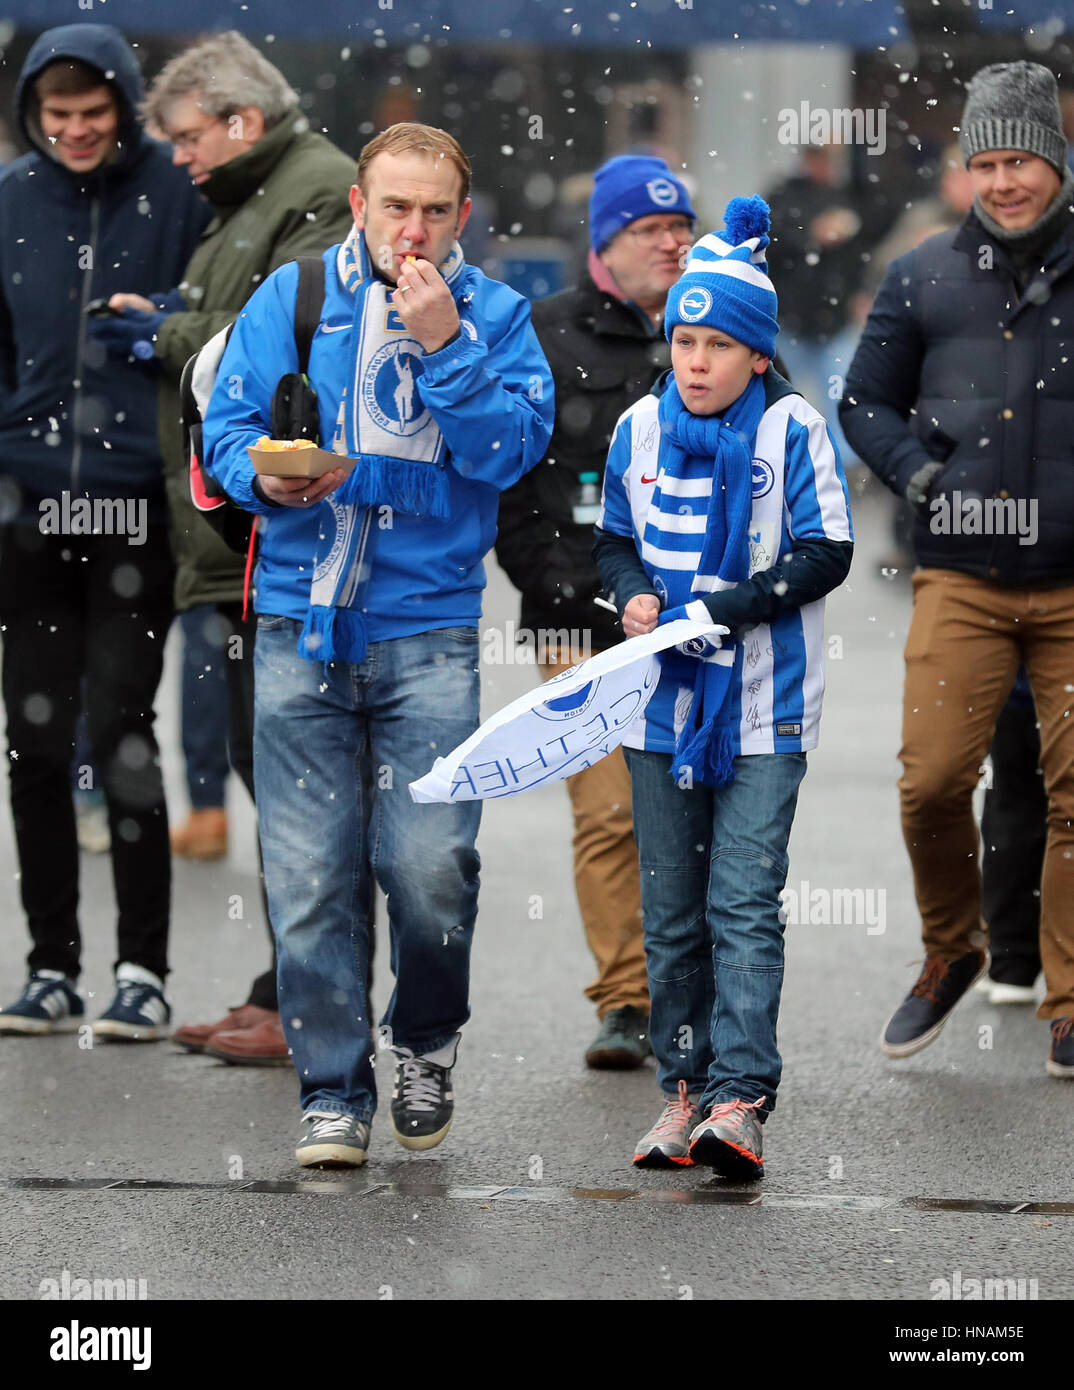 Brighton fans arrive in the cold weather before the Sky Bet Championship match at the AMEX Stadium, Brighton. PRESS ASSOCIATION Photo. Picture date: Saturday February 11, 2017. See PA story SOCCER Brighton. Photo credit should read: Gareth Fuller/PA Wire. RESTRICTIONS: No use with unauthorised audio, video, data, fixture lists, club/league logos or 'live' services. Online in-match use limited to 75 images, no video emulation. No use in betting, games or single club/league/player publications. Stock Photo